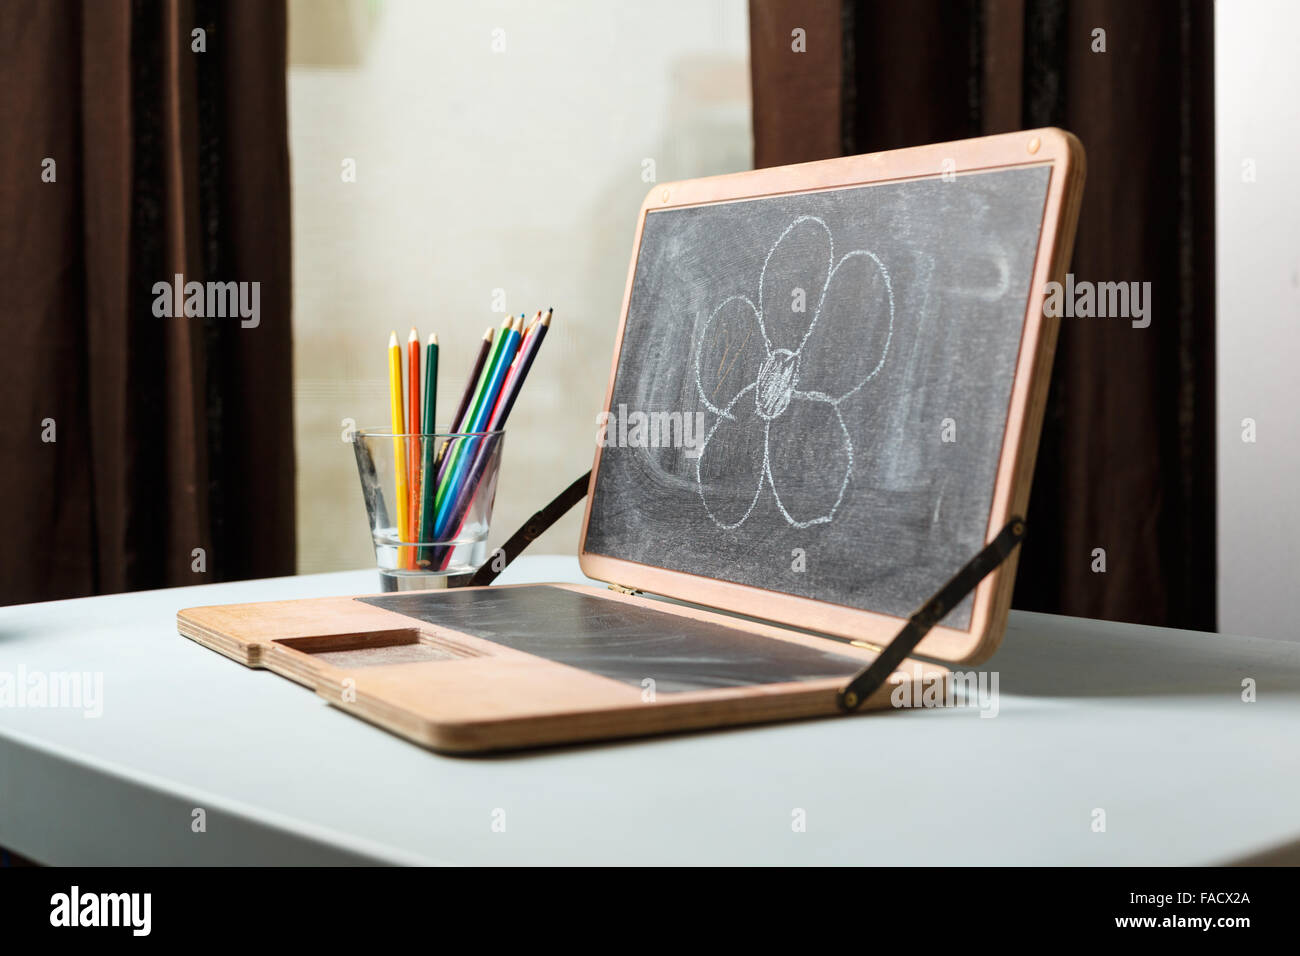 Chalkboard in a form of a laptop with color chalks and penс ils in a glass with flower painted on a board Stock Photo